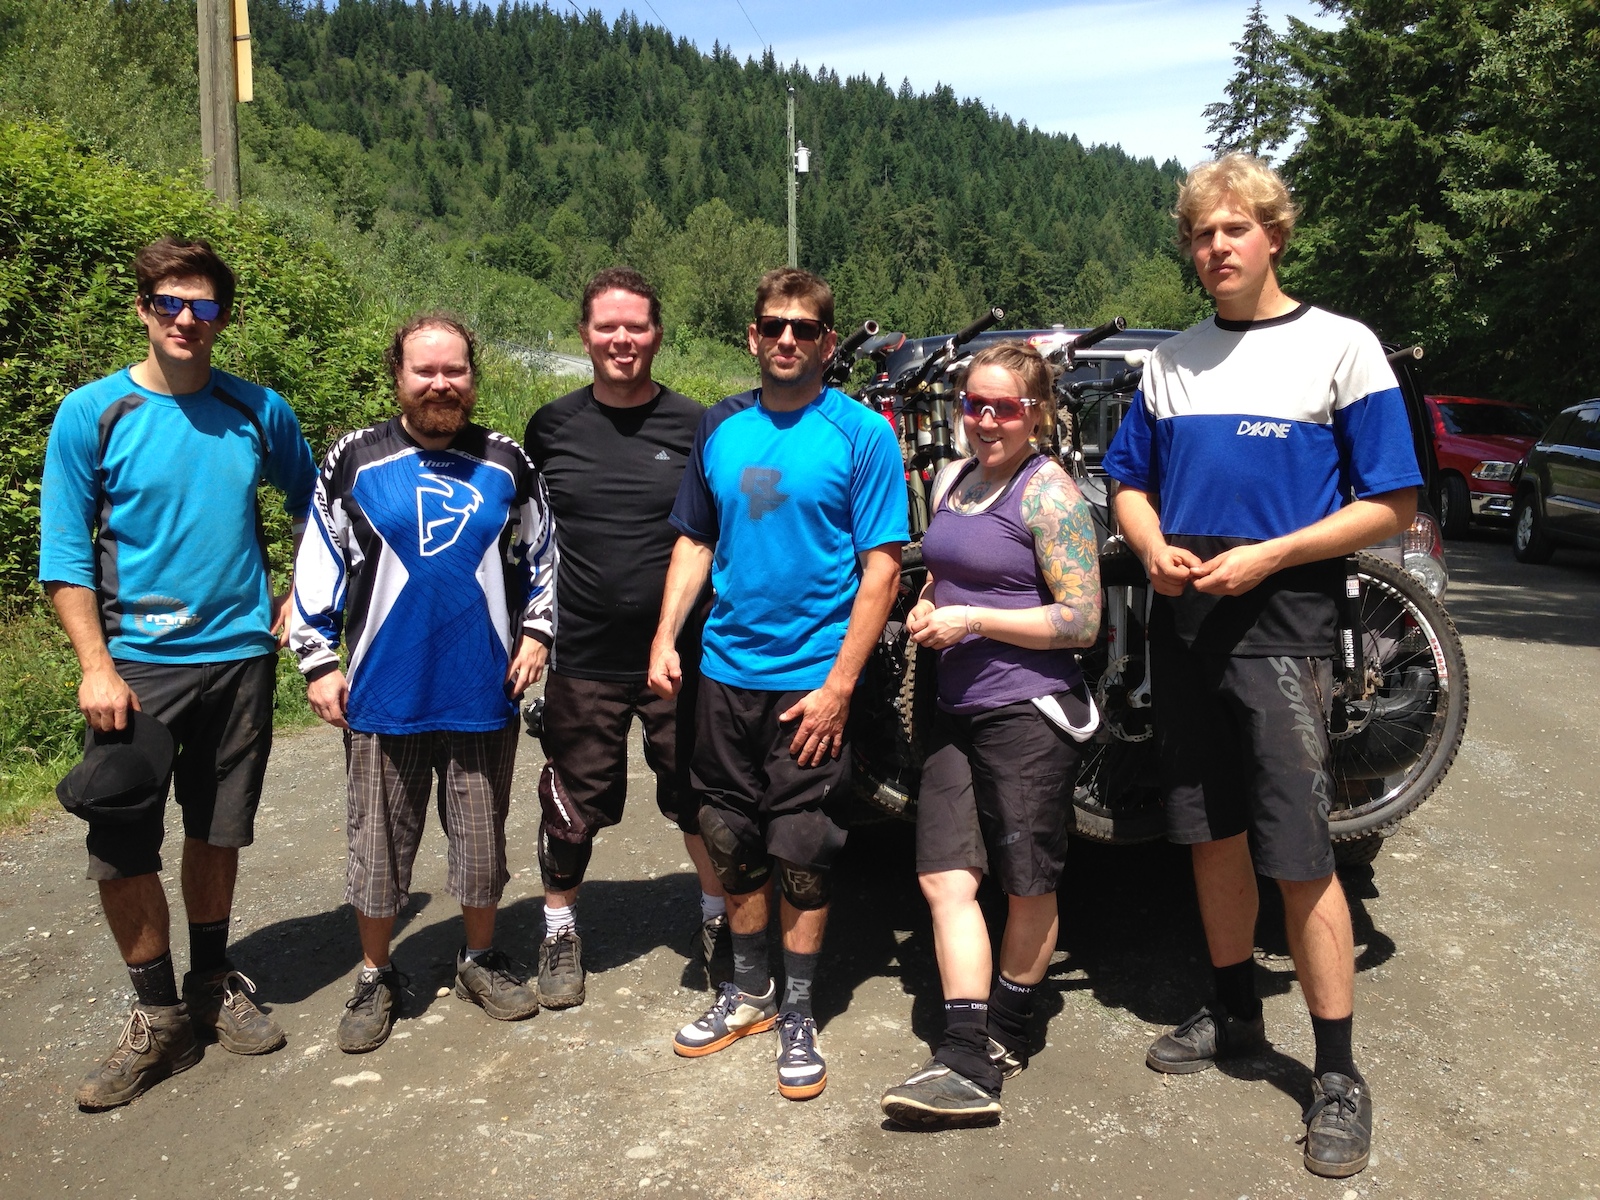 Ran into this bunch of nobodies on Vedder Mountain June 15, 2013. 

It was pretty awesome running into Wade Simmons. I have been a fan of his since 1997 when I bought my first Rocky Mountain Cardiac. Was a little star struck I must say. They were riding Vedder for a Pinkbike article "Rule of Thirds 1/3 - Welcome to the Fraser Valley"